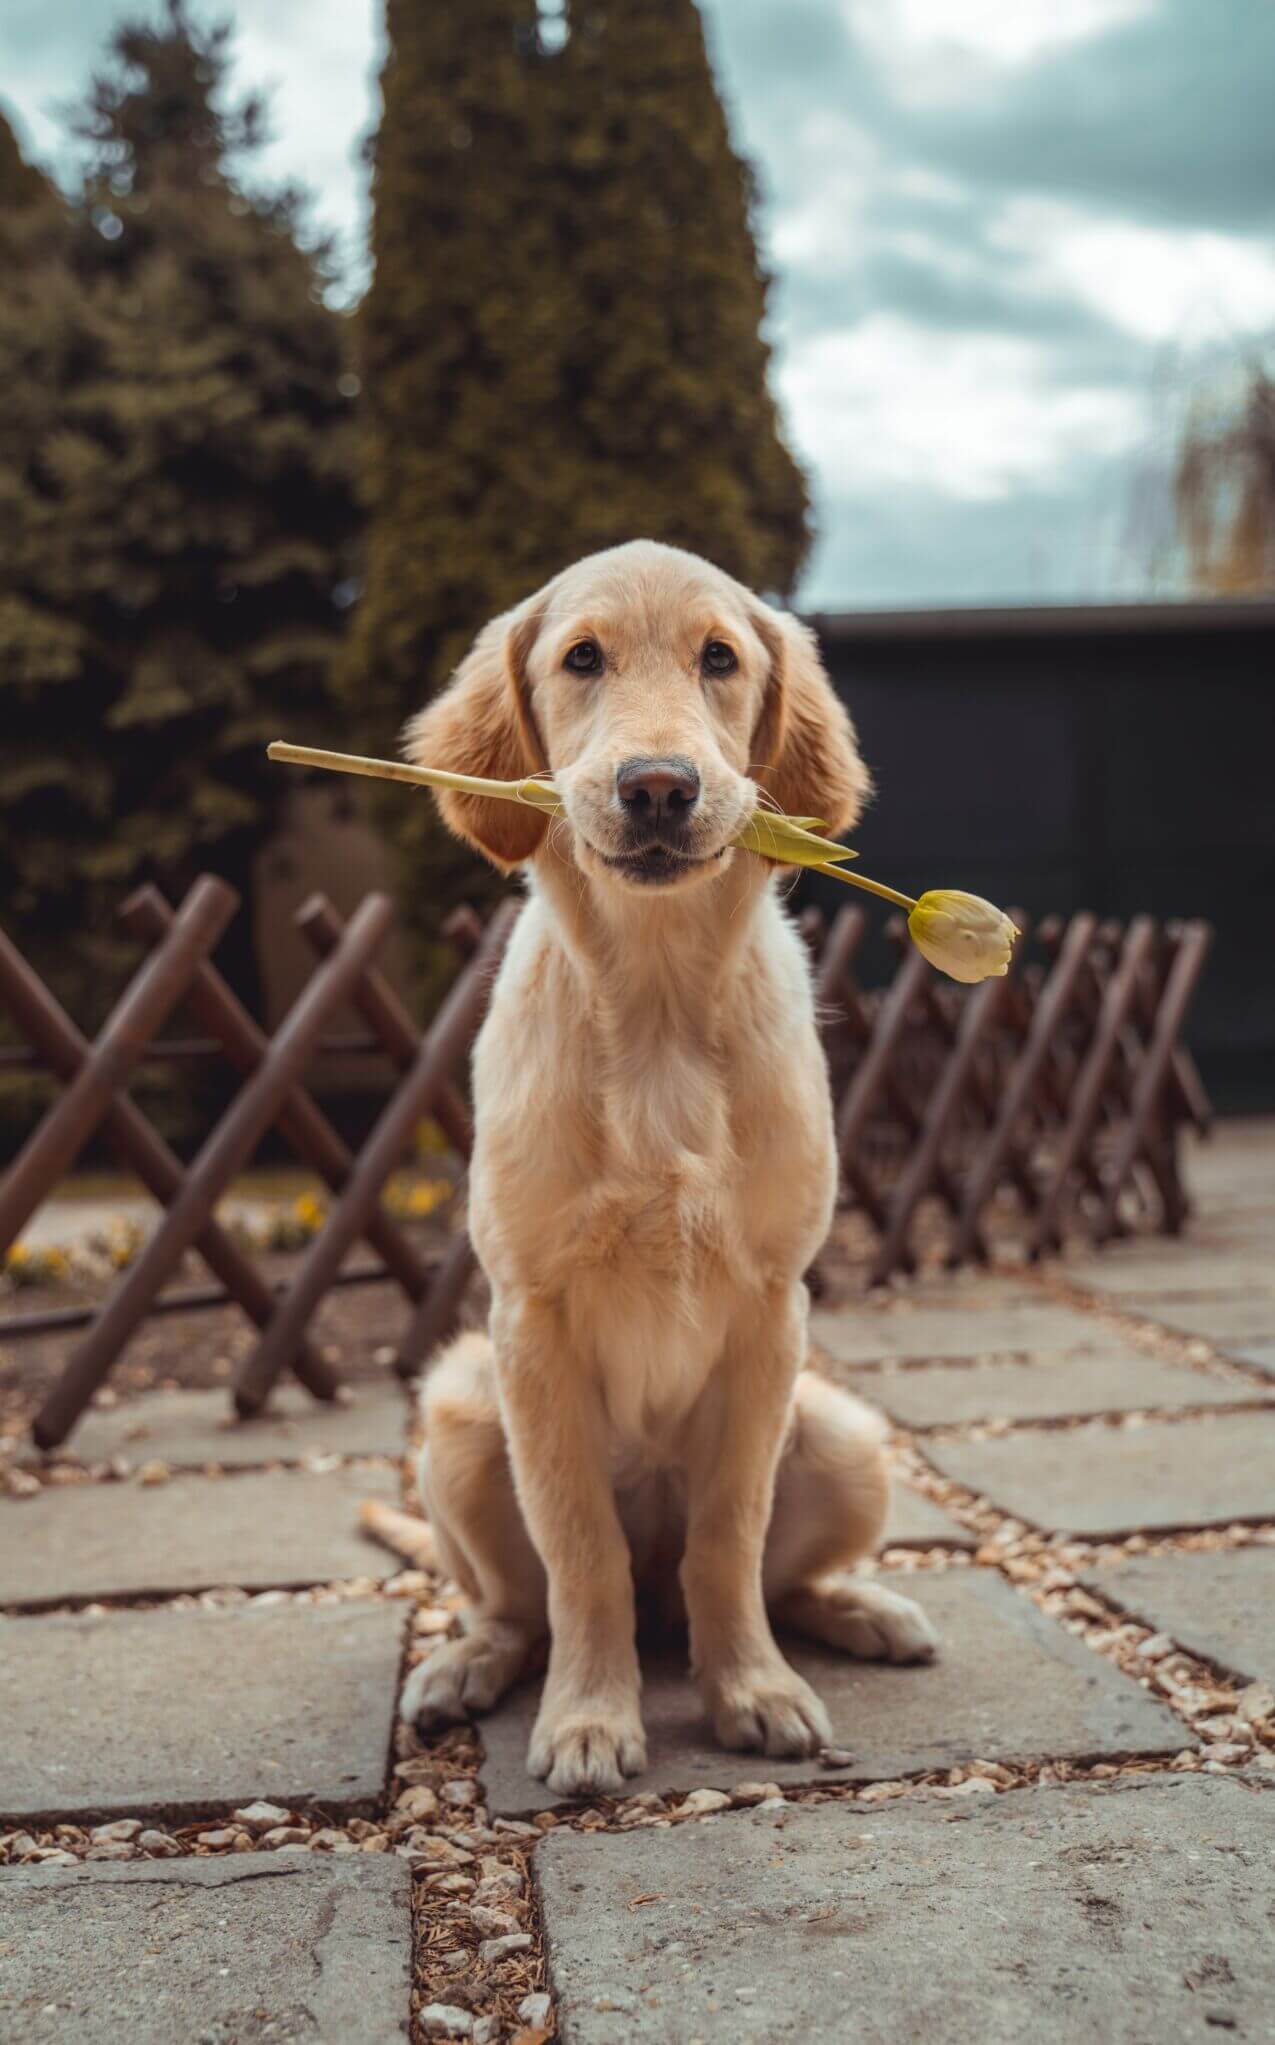 Labrador holding a flower between teeth, thanking the user for their donation.